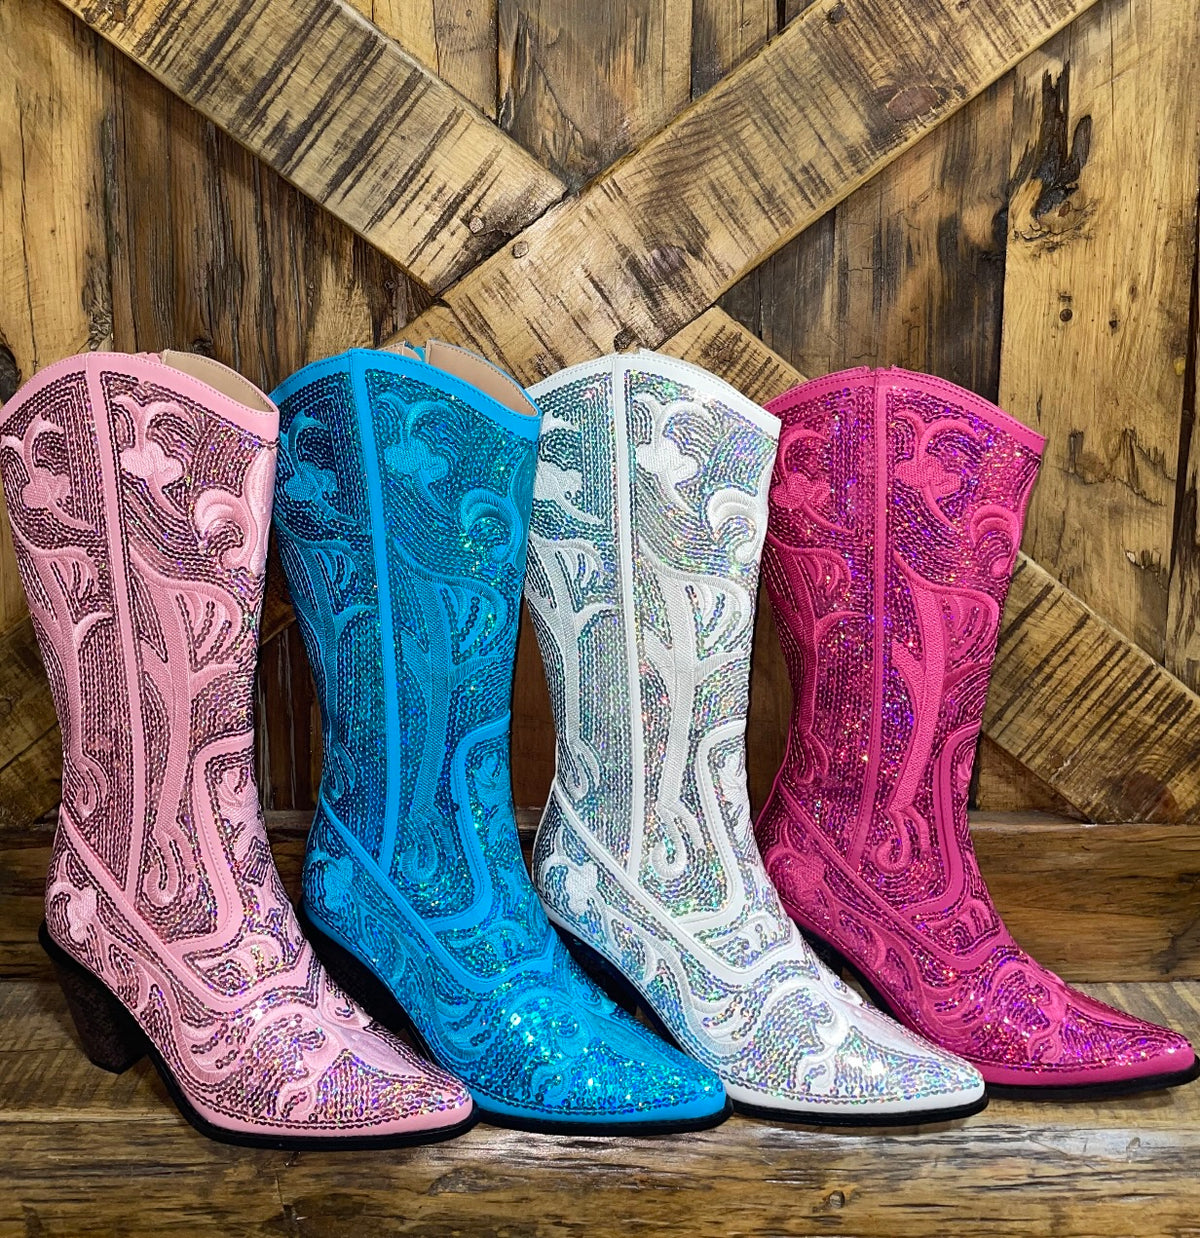 Bling Bling Baby Cowgirl Boot Collection